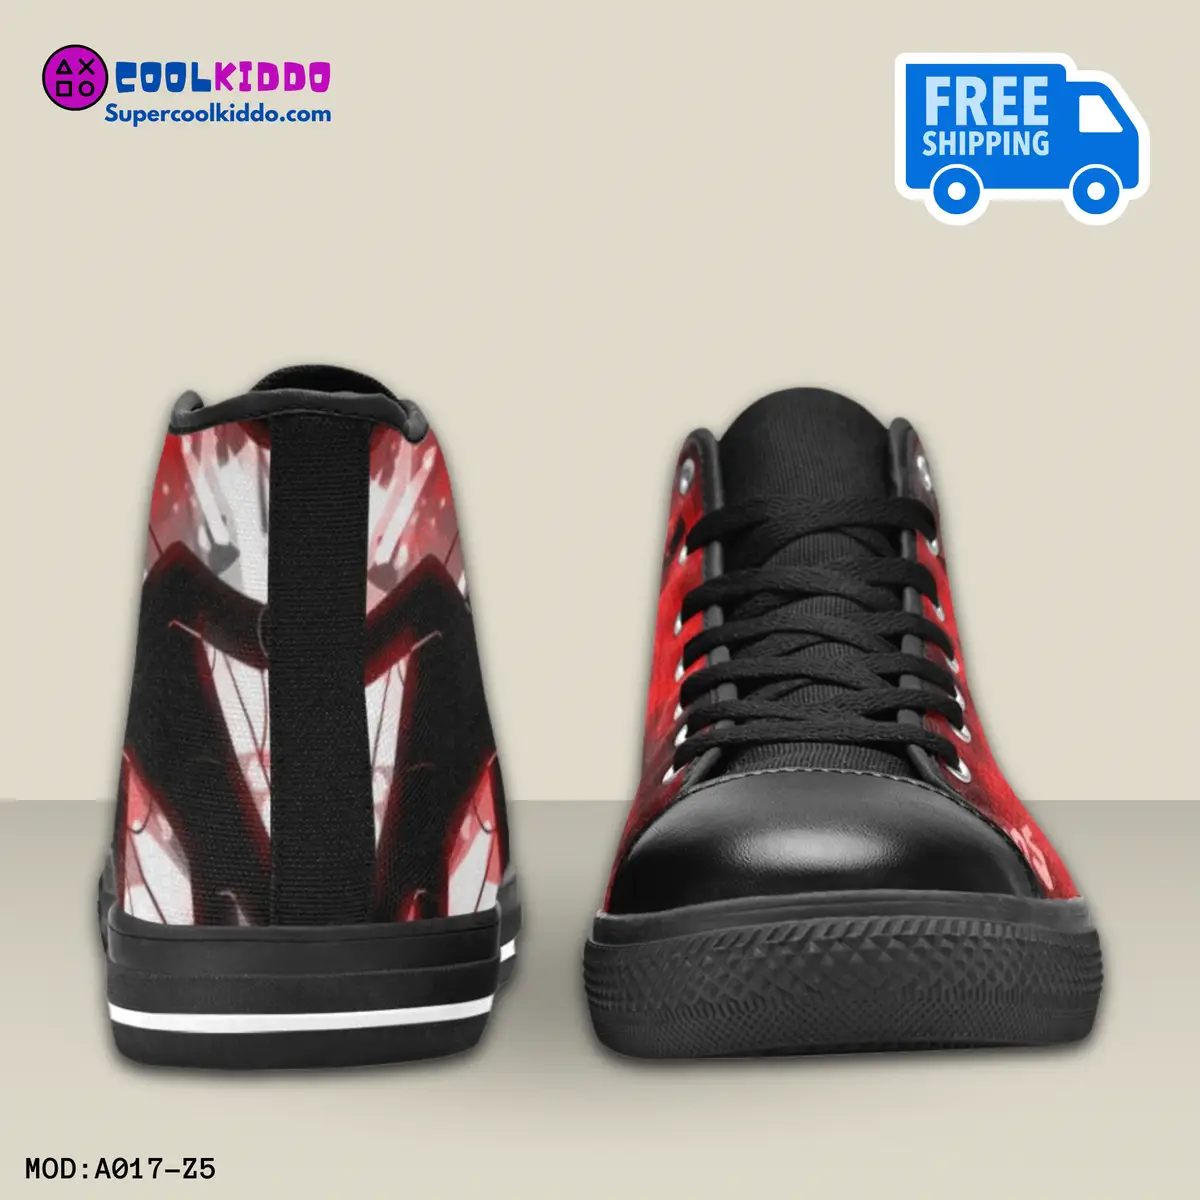 Roblox Doors Inspired High Top Shoes for Kids/Youth – “Seek” Character Print. High-Top Sneakers Cool Kiddo 24